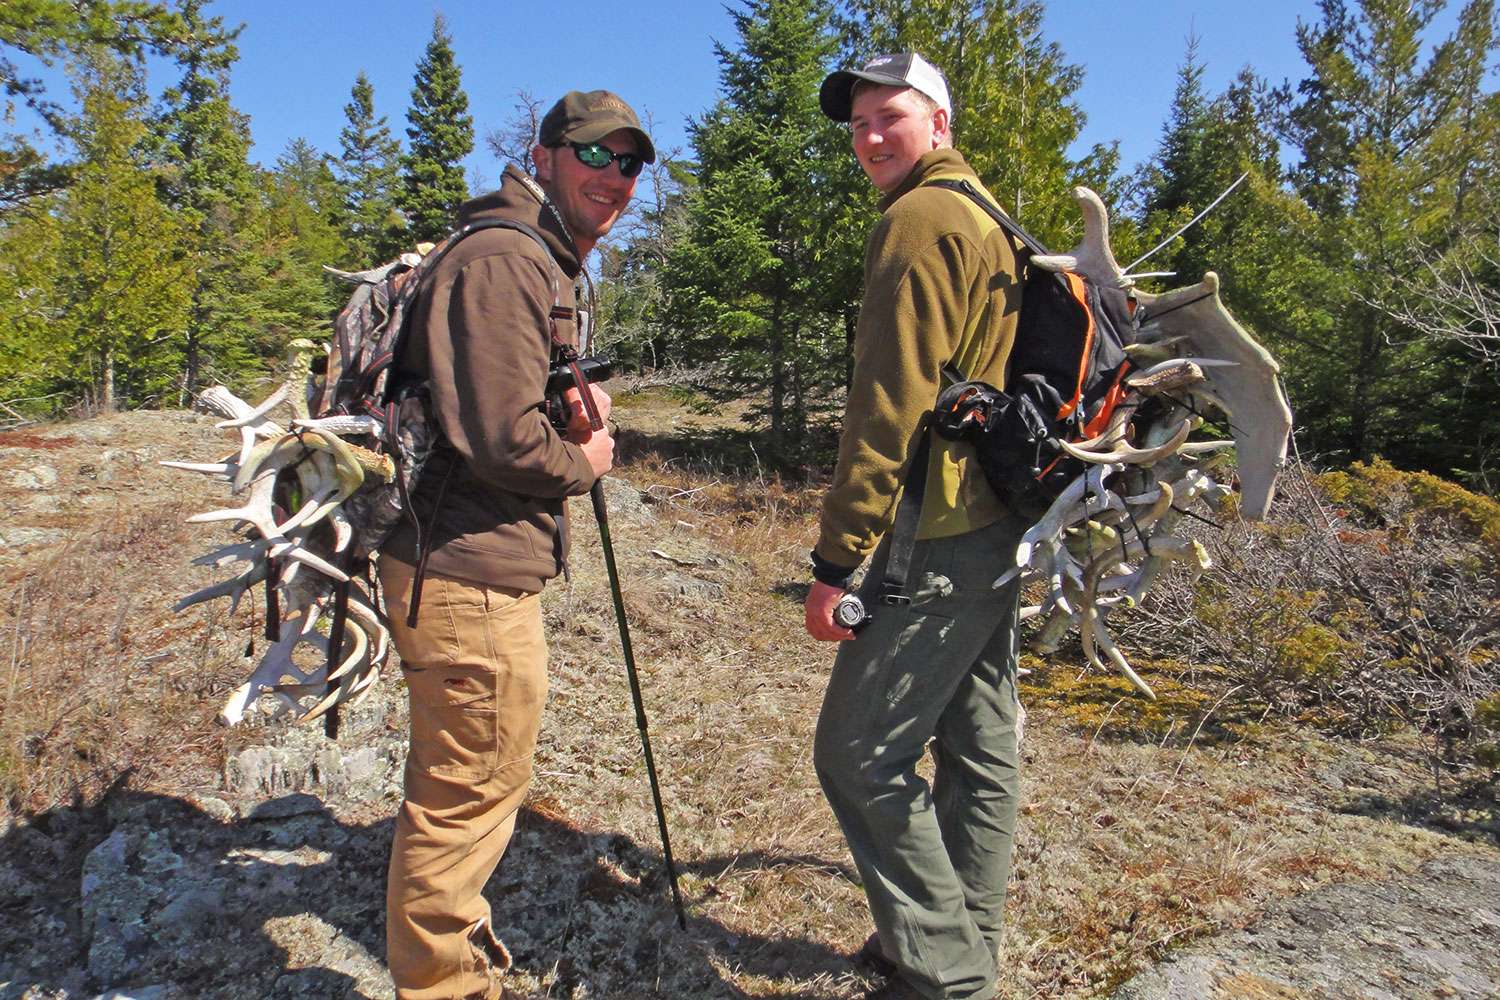 <b>What do you do in your off time, other than fish?</b></p>
<p>I guide for whitetails in the fall, so one of my favorite hobbies â itâs sort of an April hobby â is I love to go (antler) shed hunting. Iâve got a few thousand sheds at home from deer, and a few from moose, but mostly deer. Where I live no one does it, and itâs kind of remote, so Iâve had days when Iâve found 75 sheds. I couldnât even carry them all out.